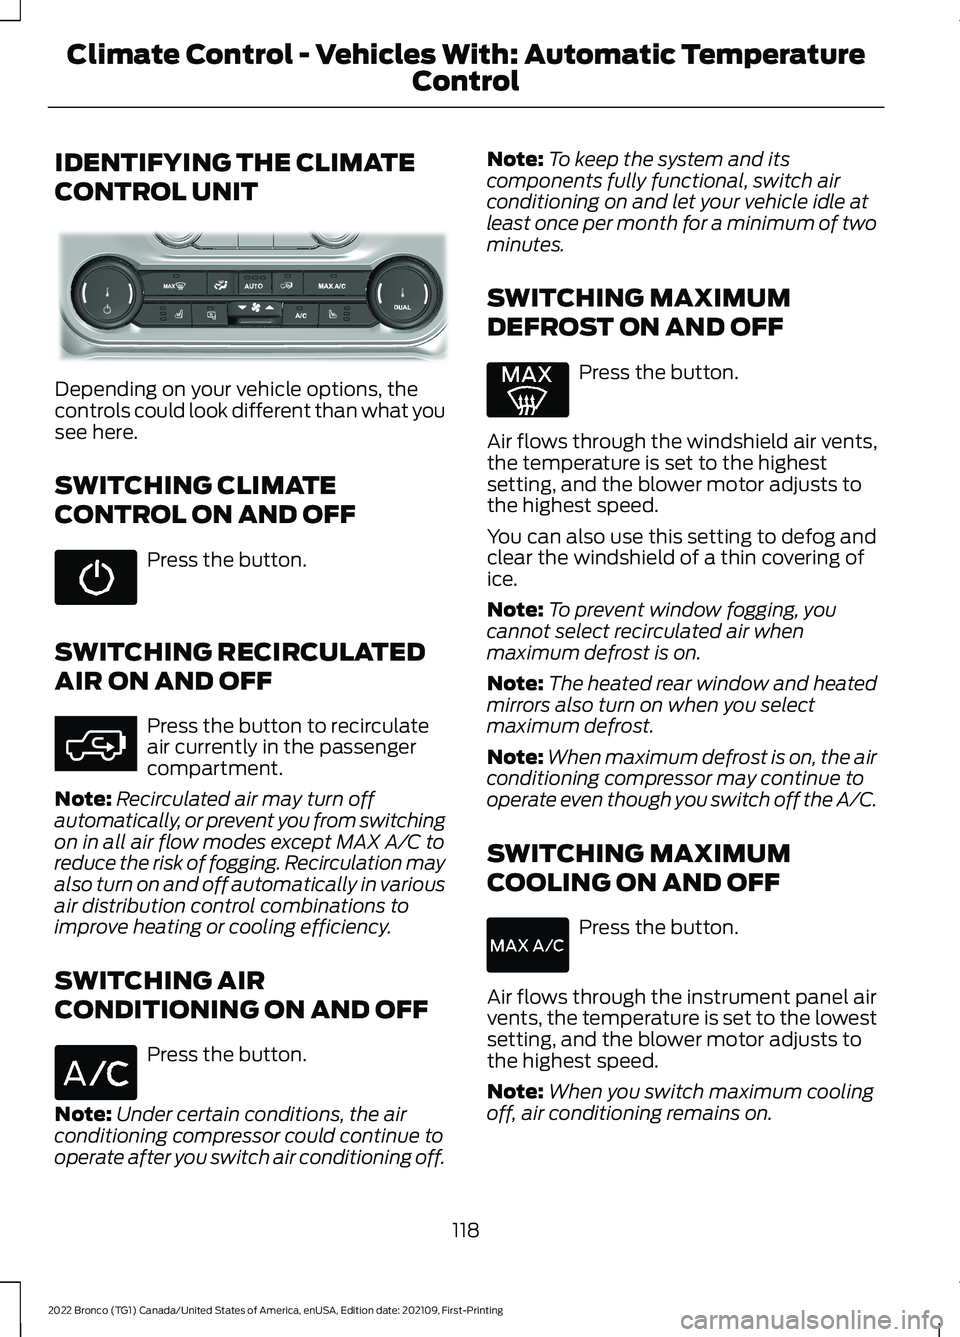 FORD BRONCO 2022  Owners Manual IDENTIFYING THE CLIMATE
CONTROL UNIT
Depending on your vehicle options, thecontrols could look different than what yousee here.
SWITCHING CLIMATE
CONTROL ON AND OFF
Press the button.
SWITCHING RECIRCU